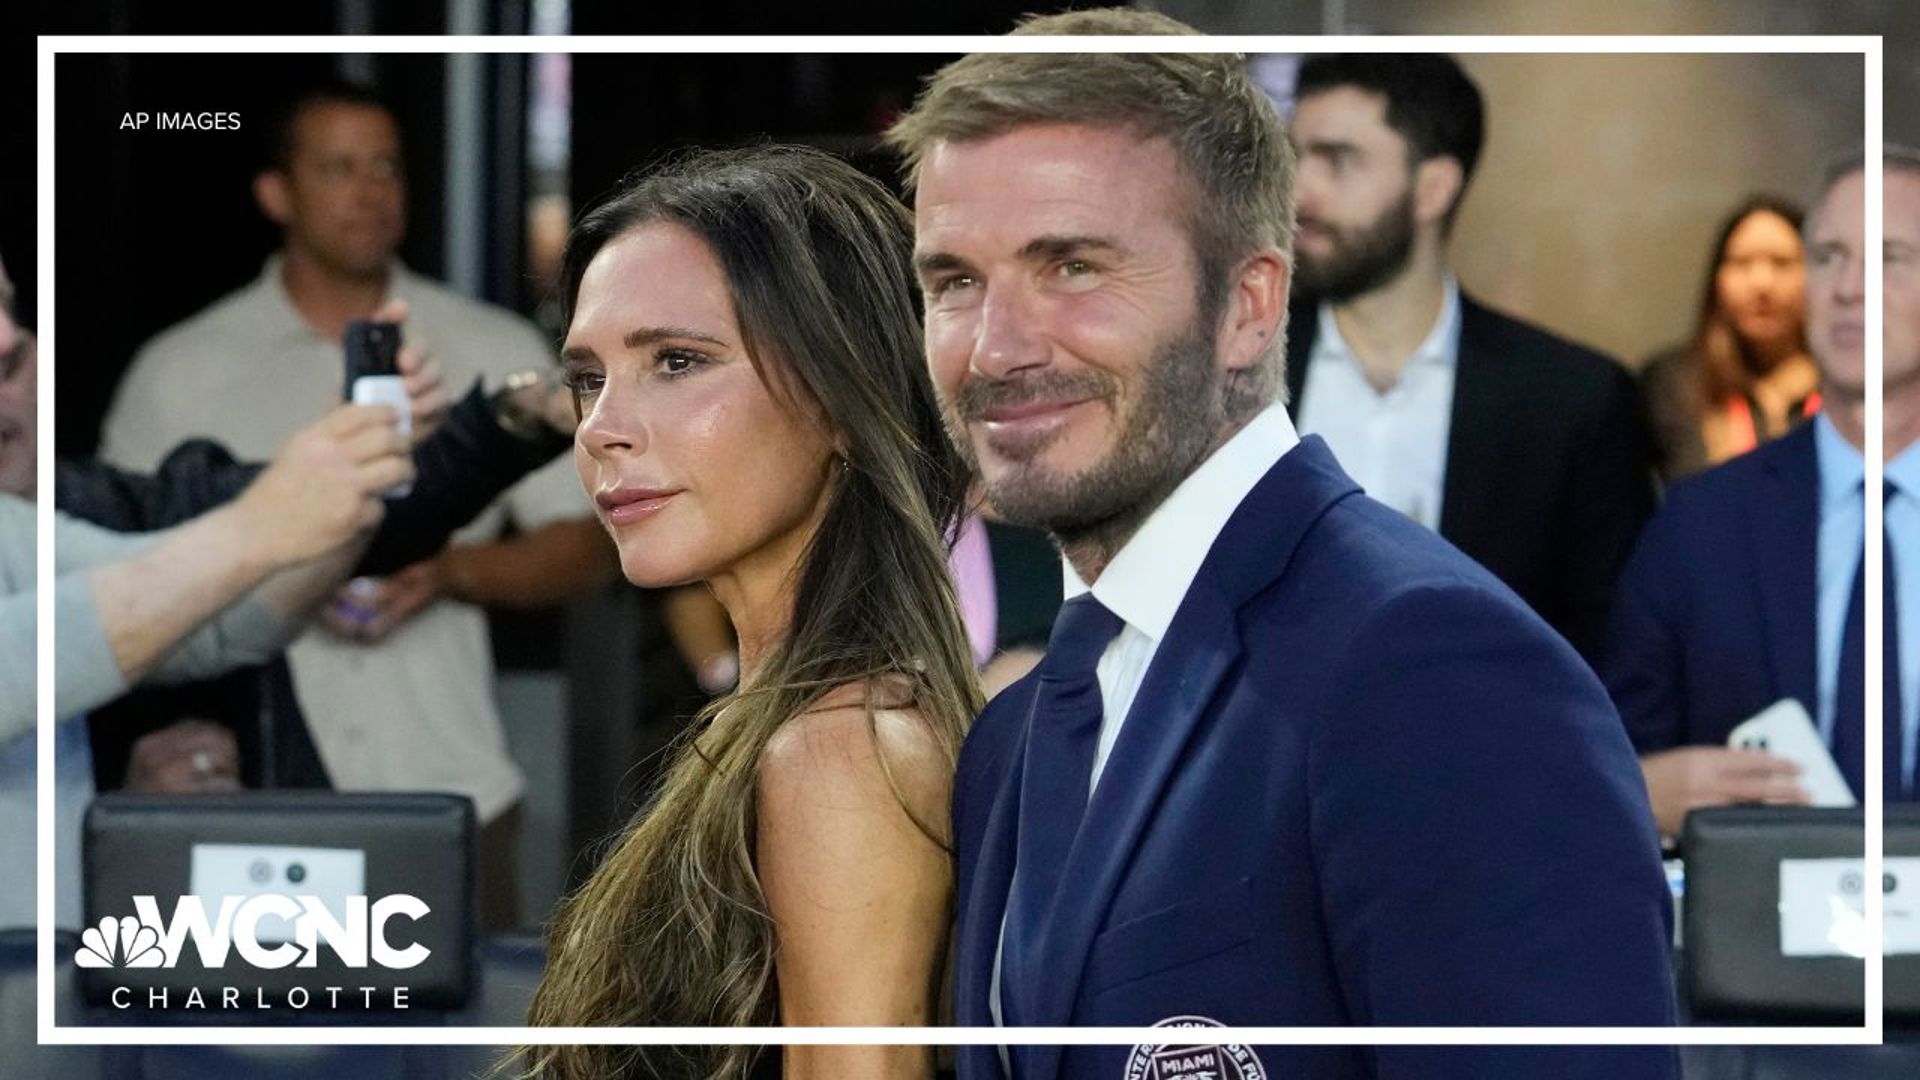 David and Victoria Beckham recreated their wedding reception while celebrating 25 years of marriage.